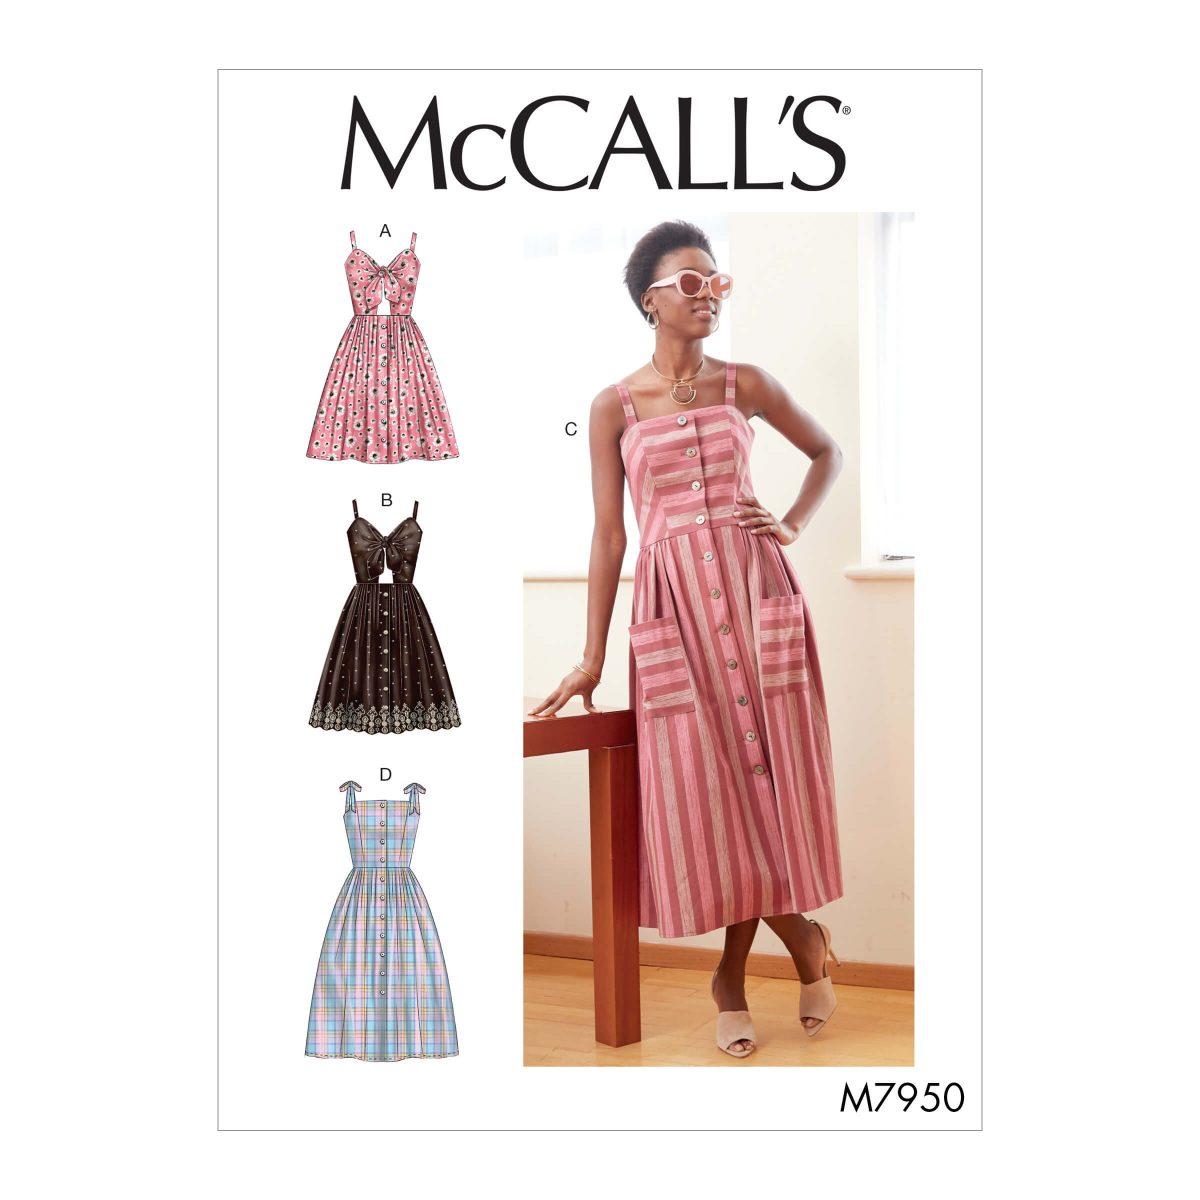 McCall's Sewing Pattern M7950 Misses' Dresses